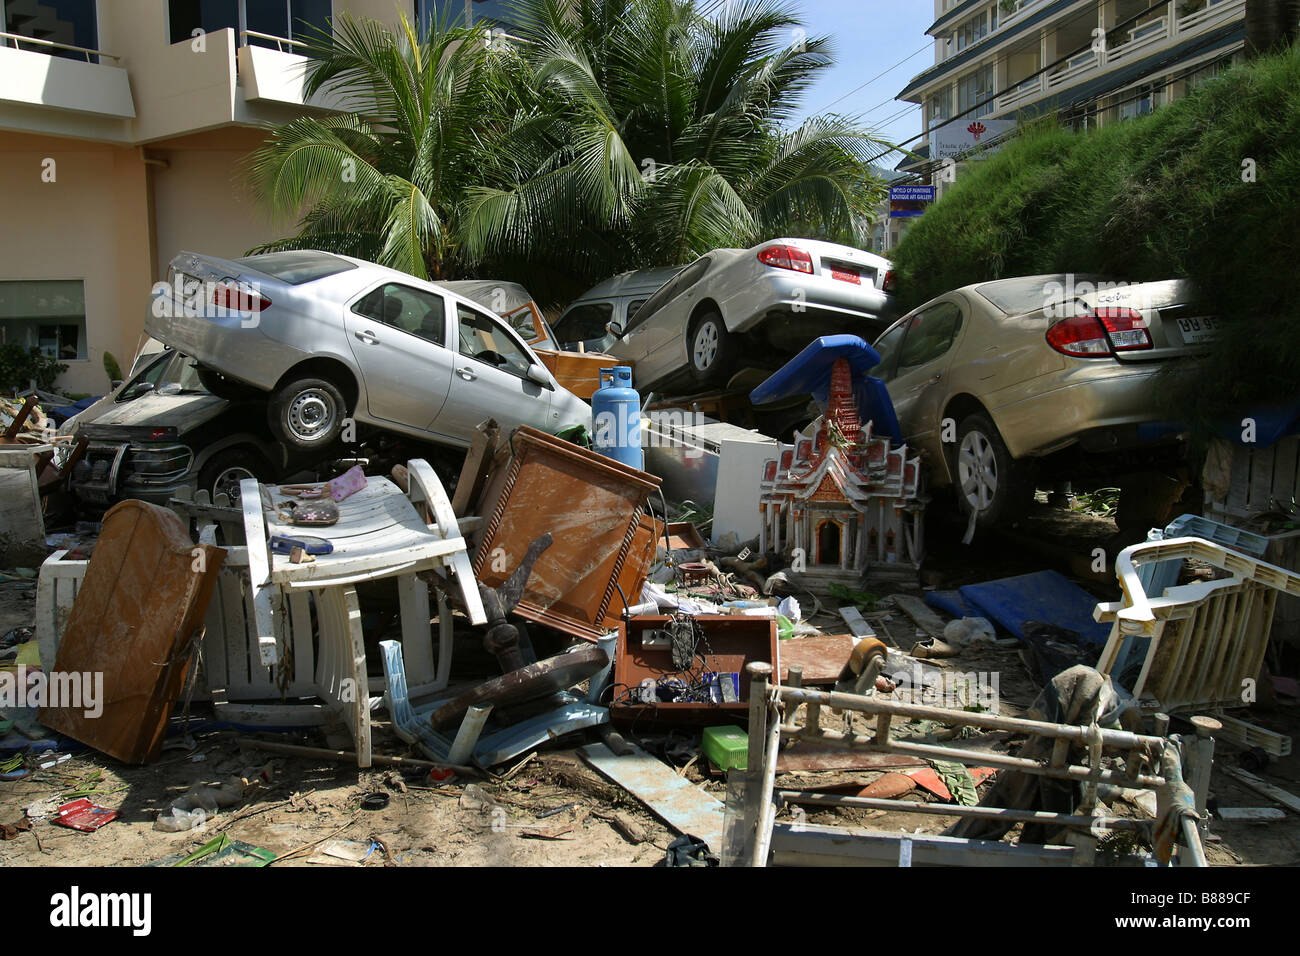 Vehicles piled up in a Holiday Inn parking lot after the December 26, 2004 tsunami hit Patong Beach on Phuket Island, Thailand. Stock Photo